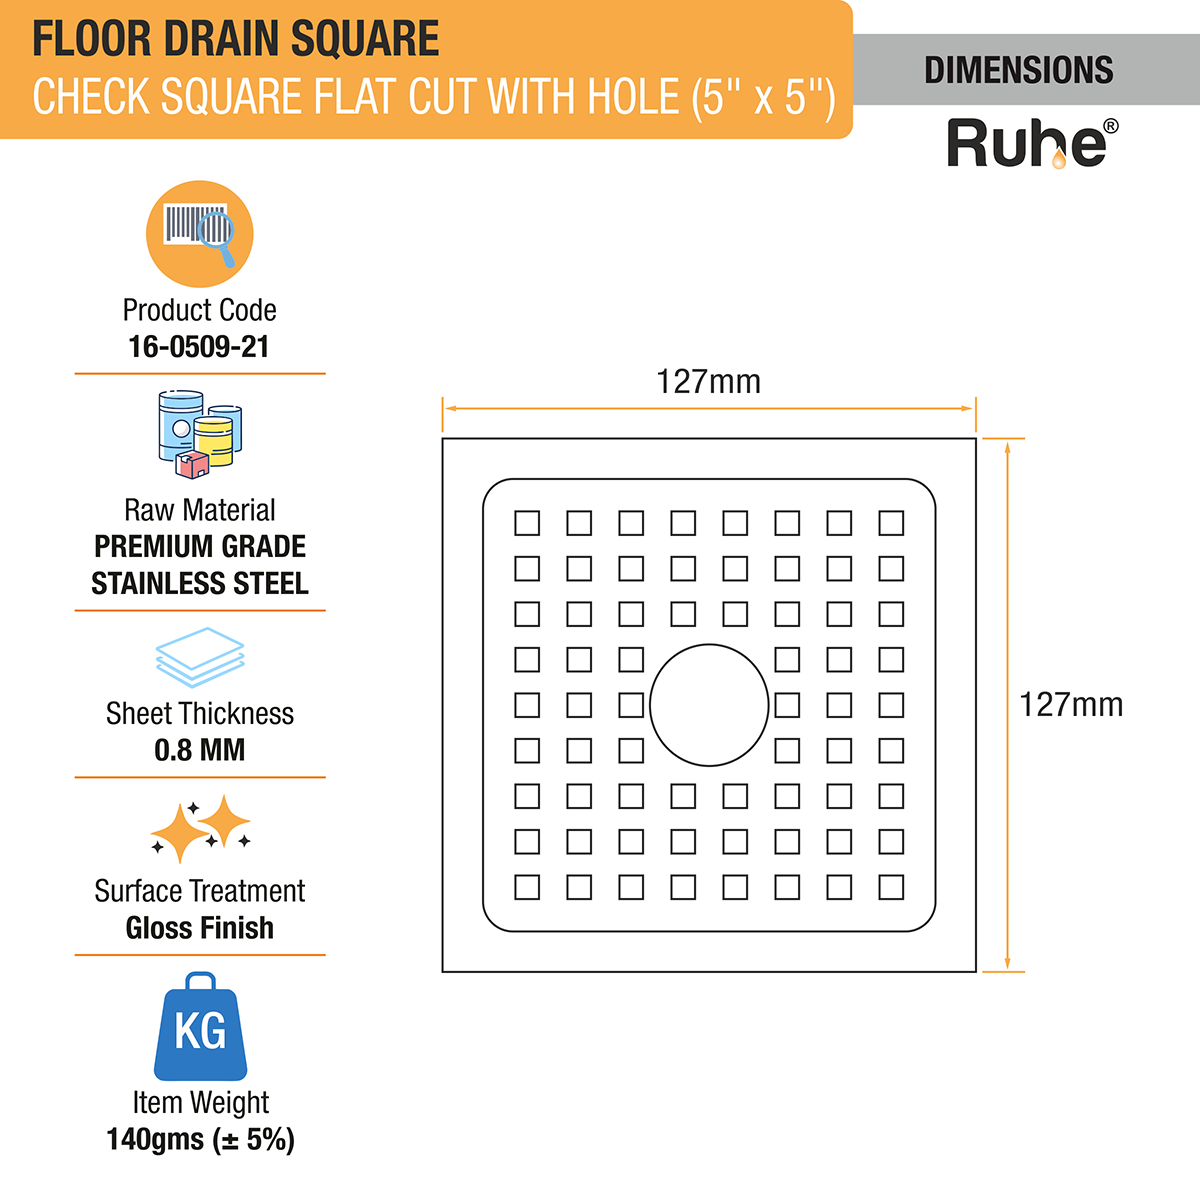 Check Floor Drain Square Flat Cut (5 x 5 Inches) with Hole dimensions and size